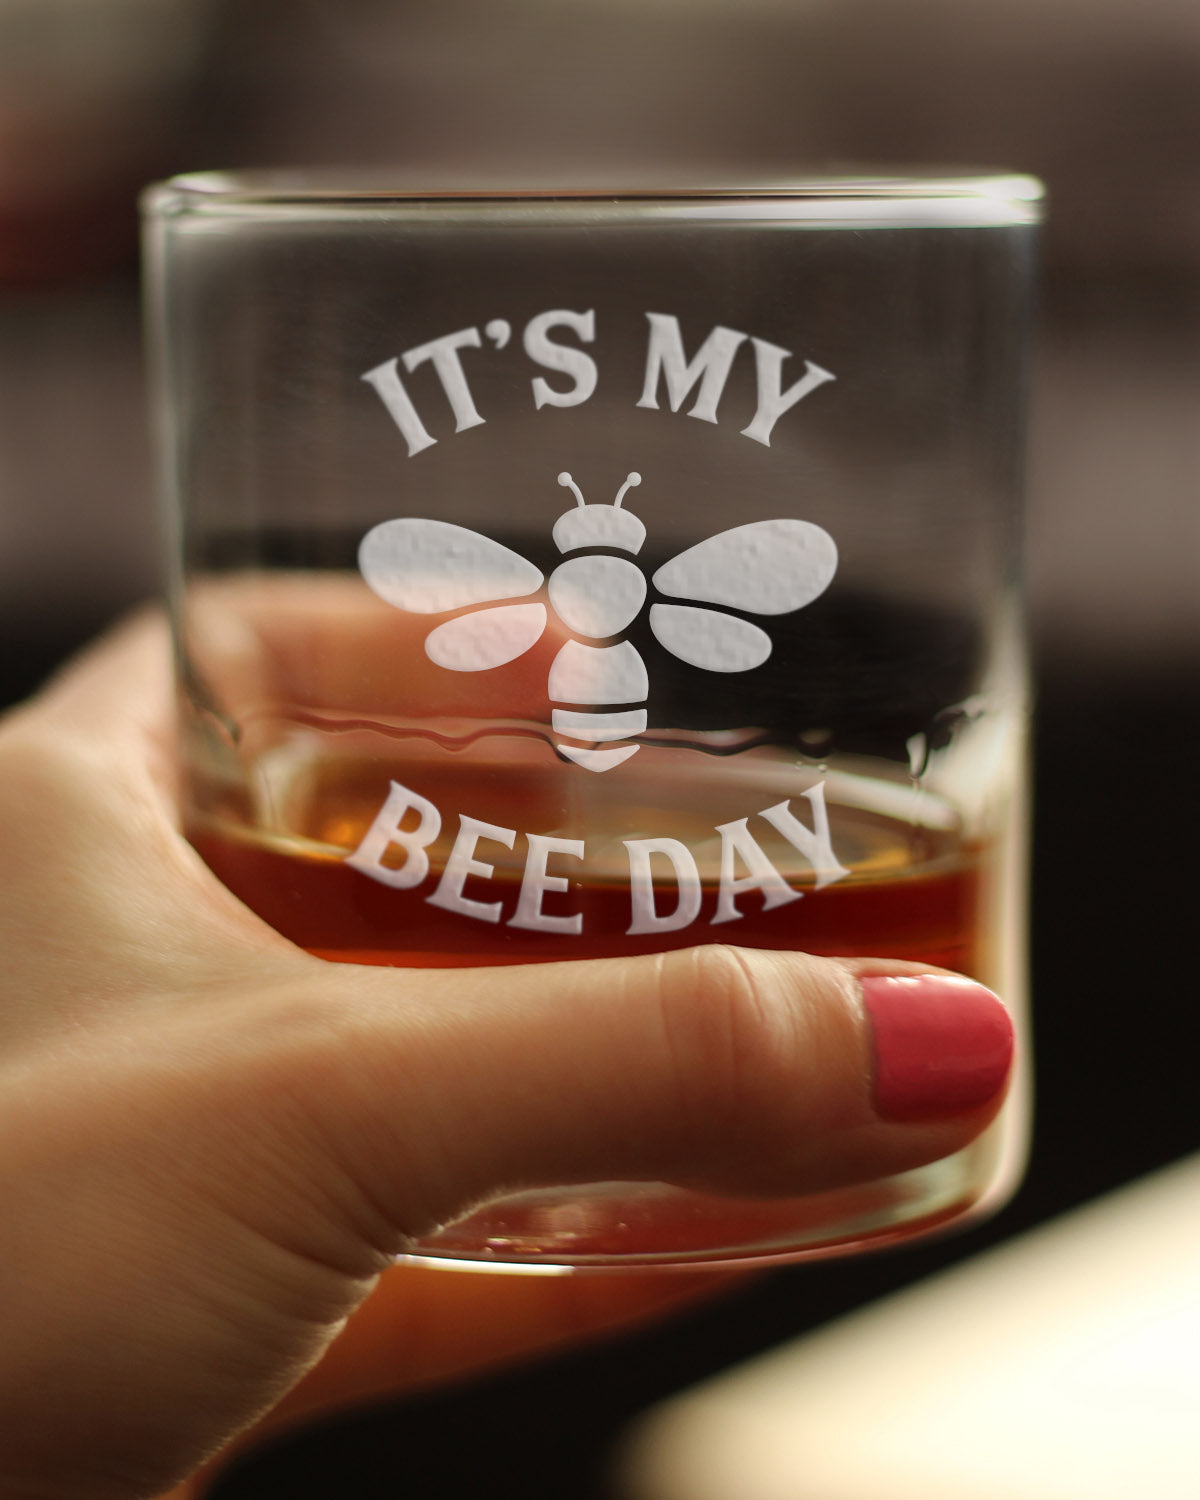 Bee Day - Whiskey Rocks Glass - Unique Bee Themed Gifts and Party Decor for Women and Men - 10.25 Oz